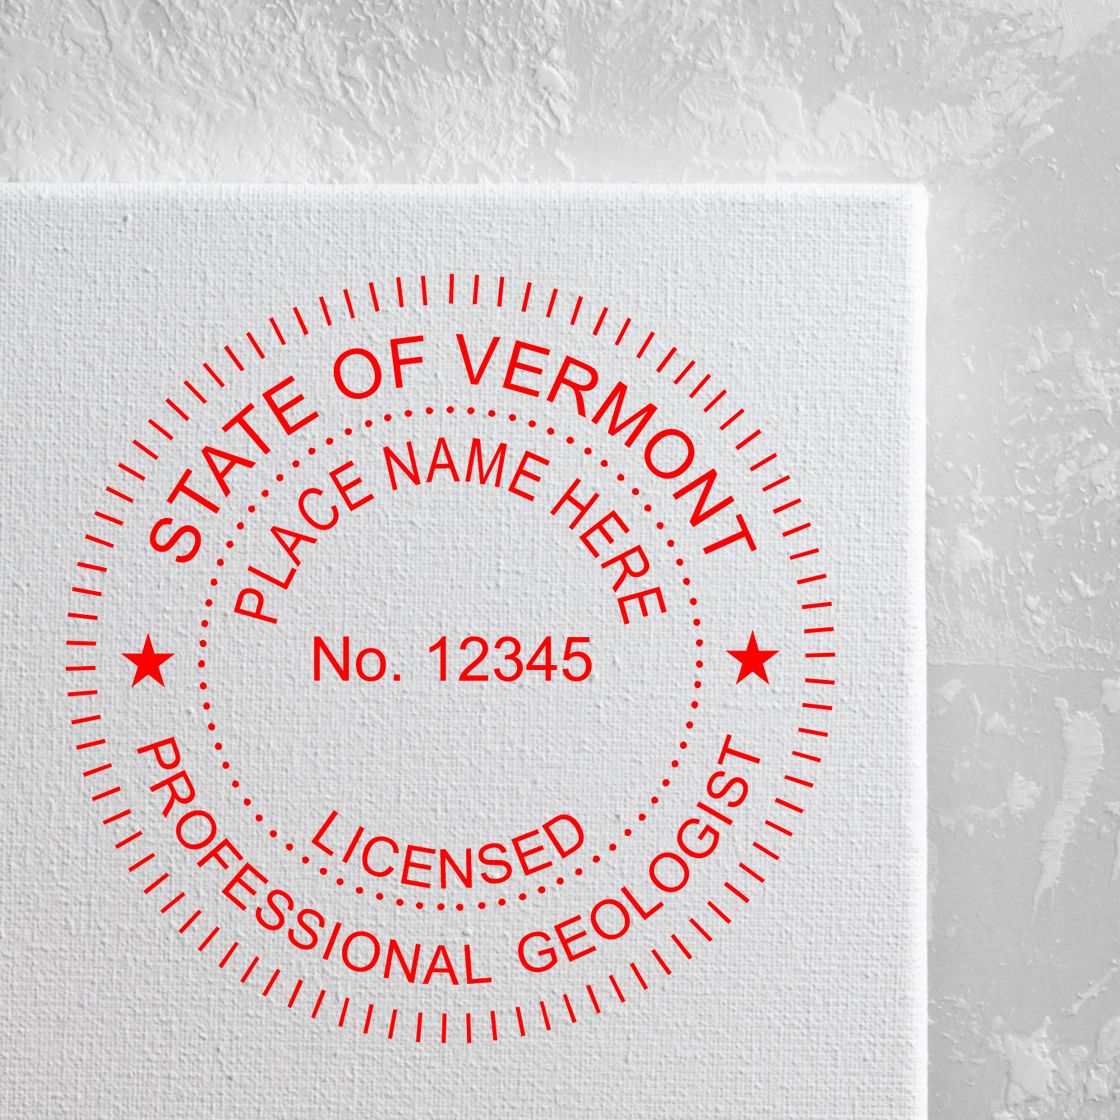 The Digital Vermont Geologist Stamp, Electronic Seal for Vermont Geologist stamp impression comes to life with a crisp, detailed image stamped on paper - showcasing true professional quality.